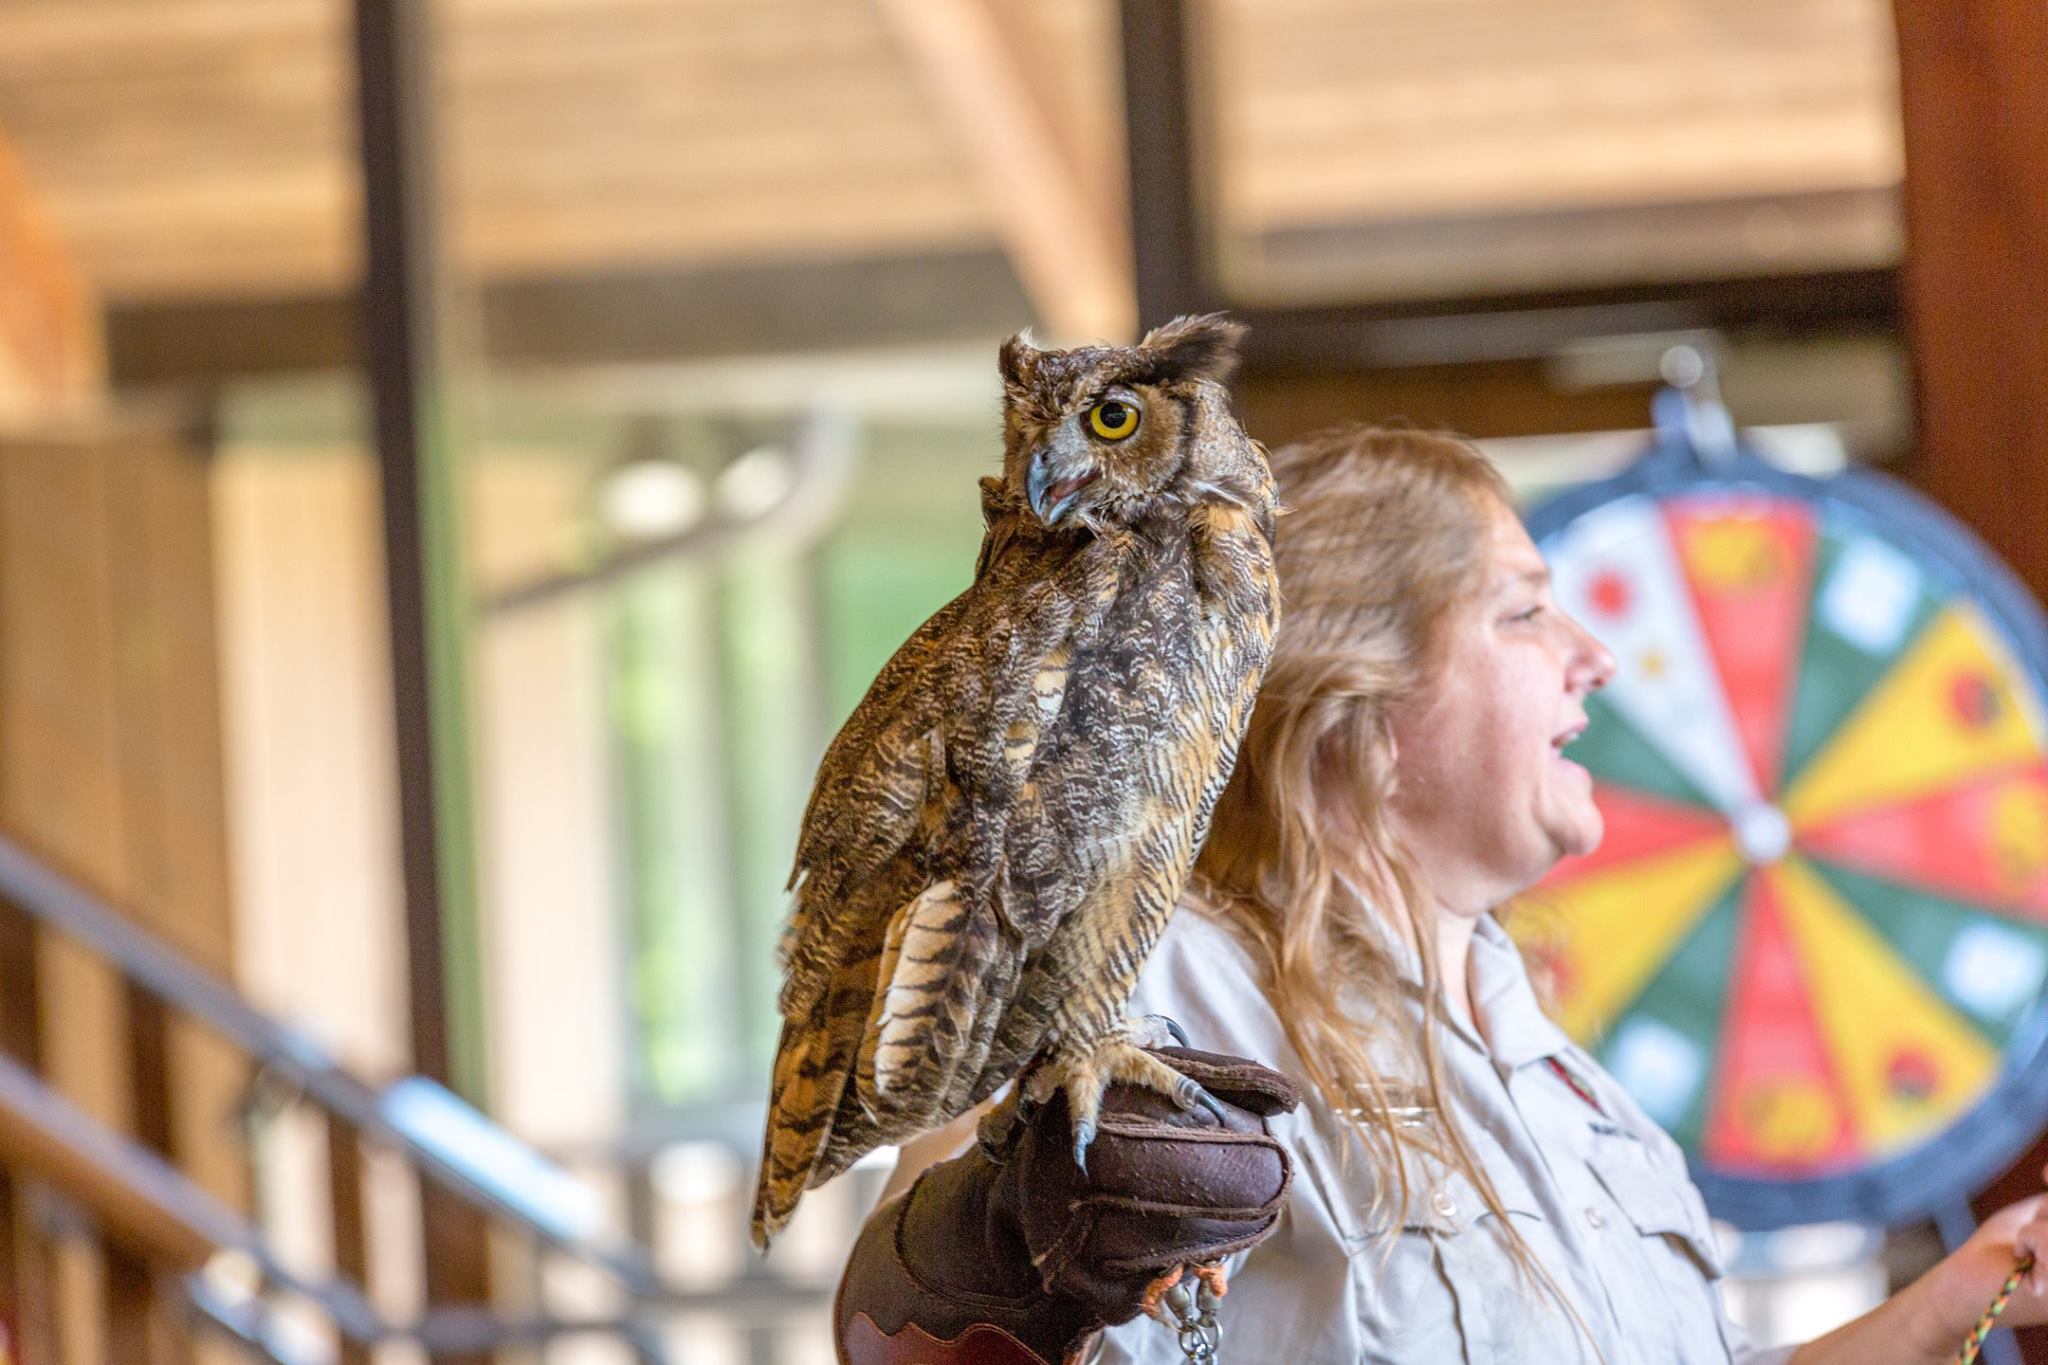 An owl is perched on a woman's gloved hand